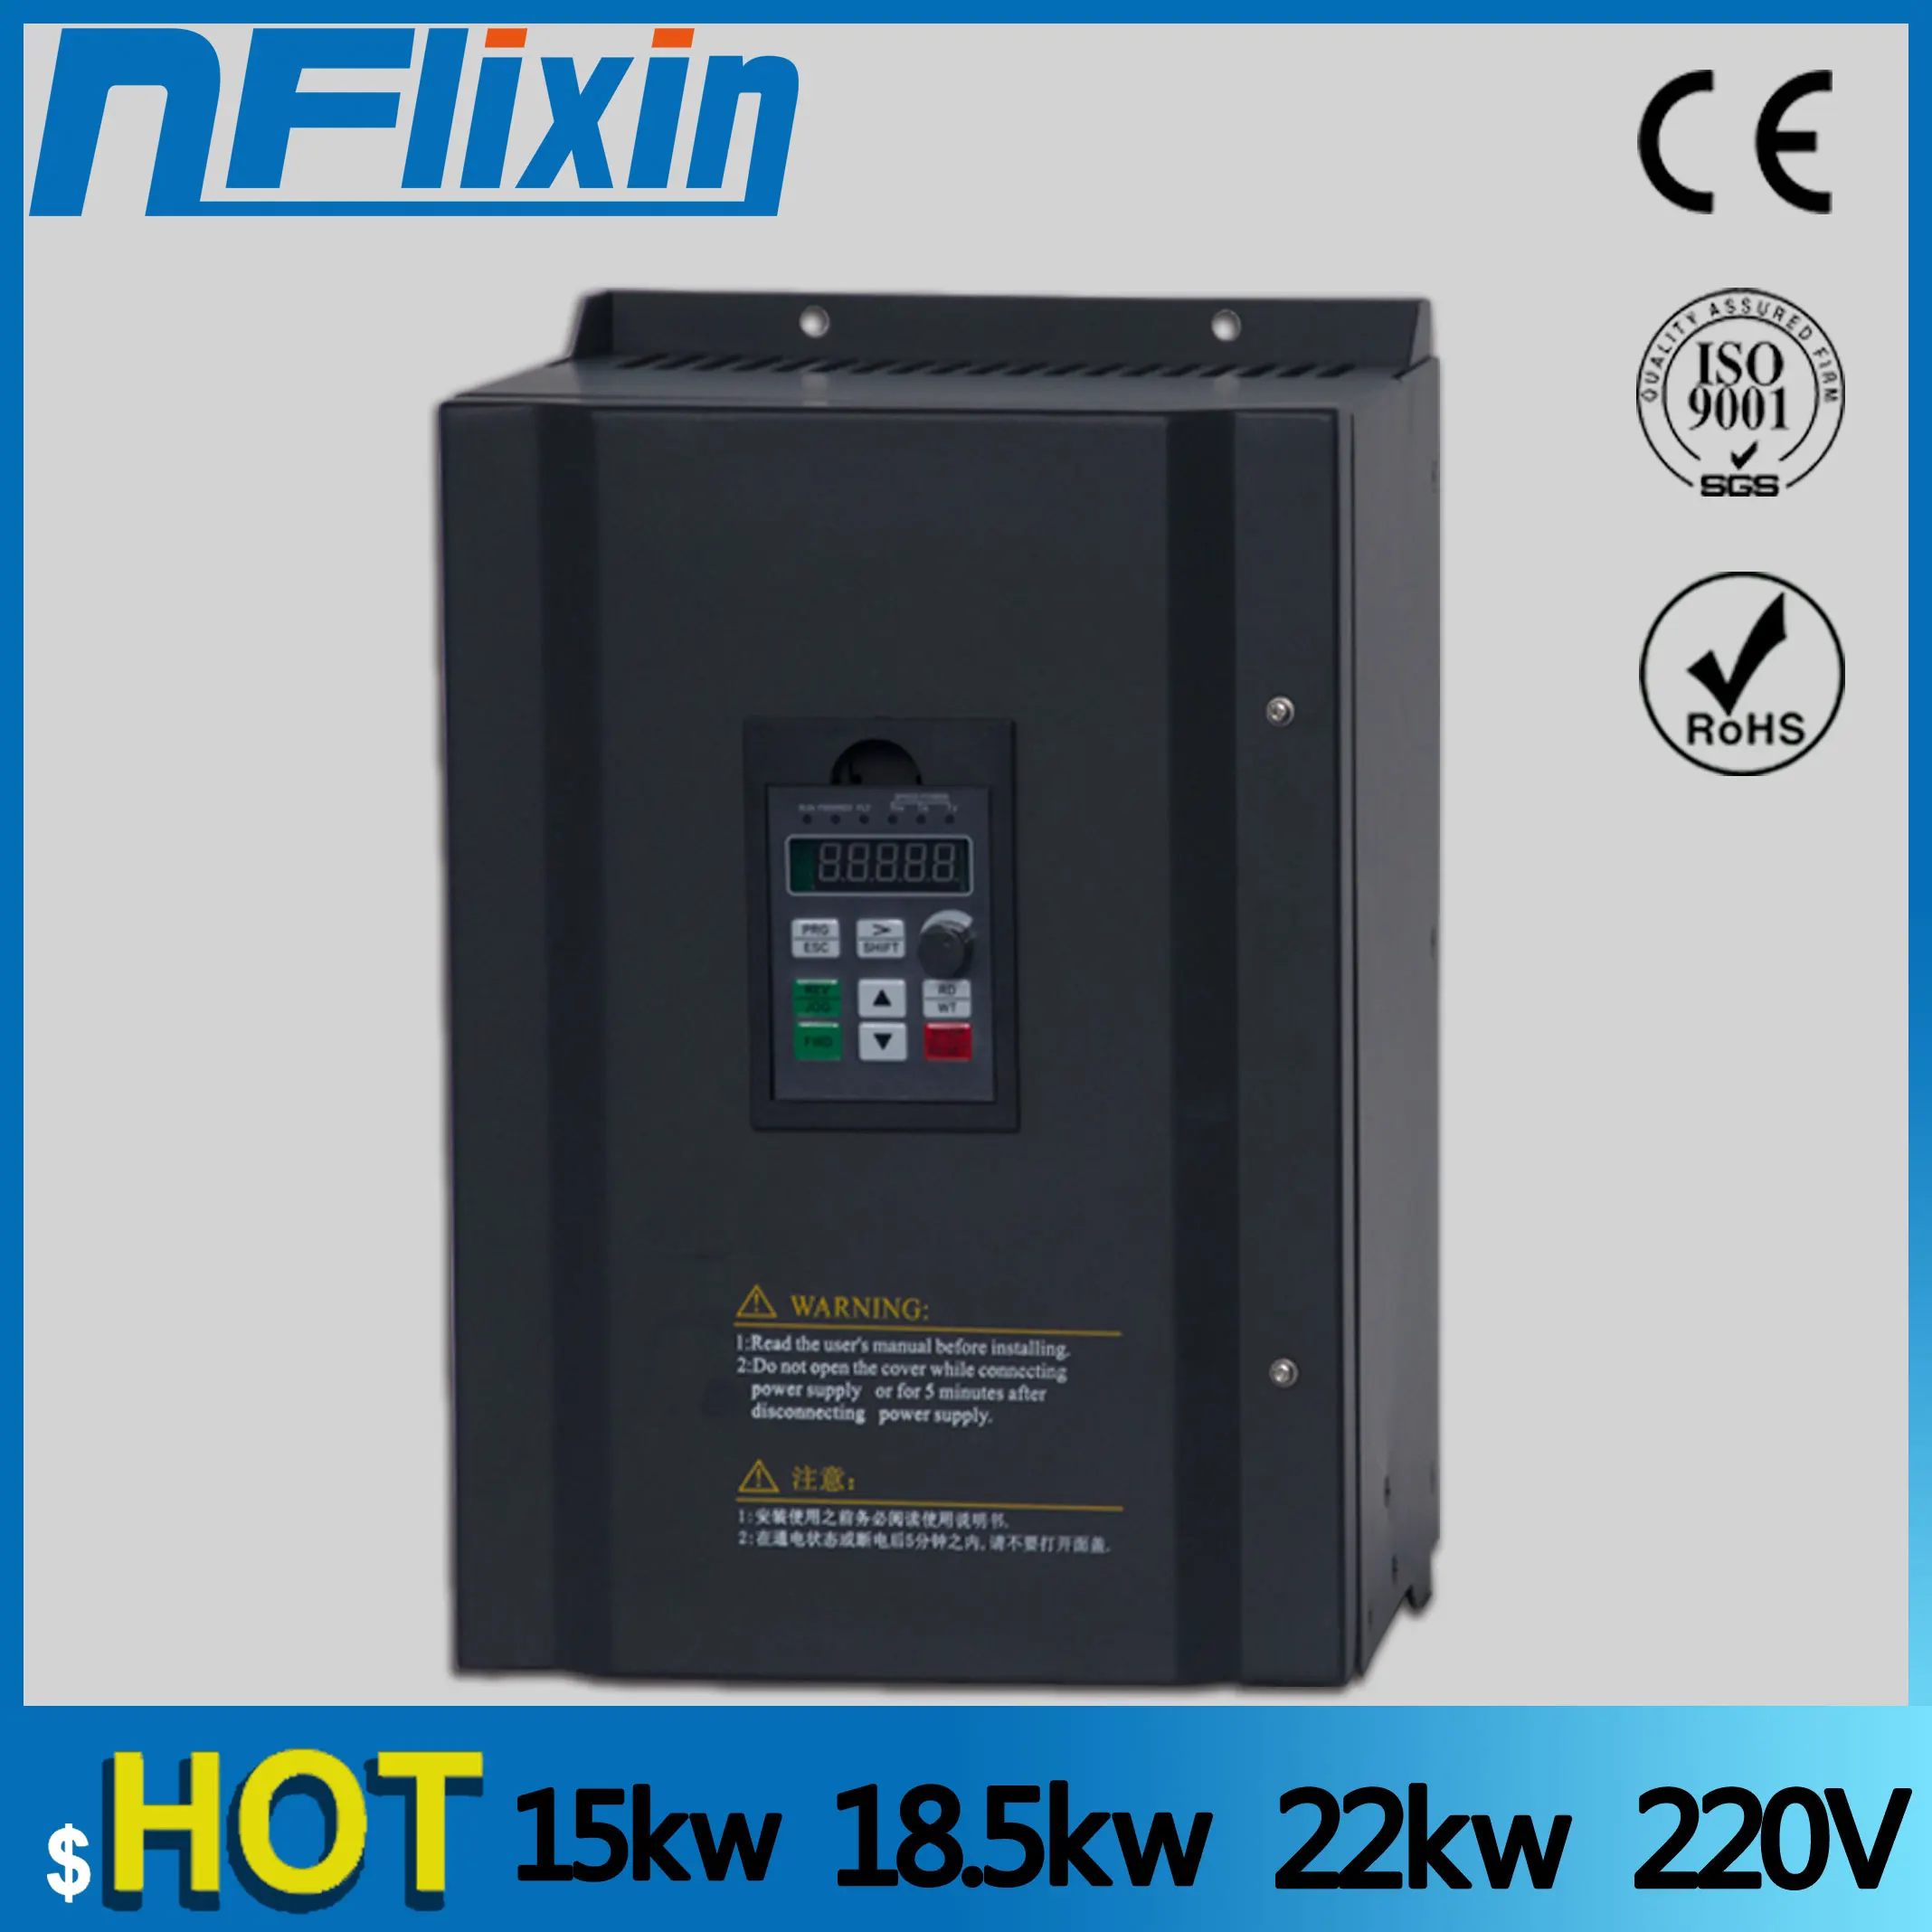 

15kw/18.5kw/22kw 220v single phase input 380v 3 phase output AC Frequency Inverter ac drives /frequency converter/ changer/Boost